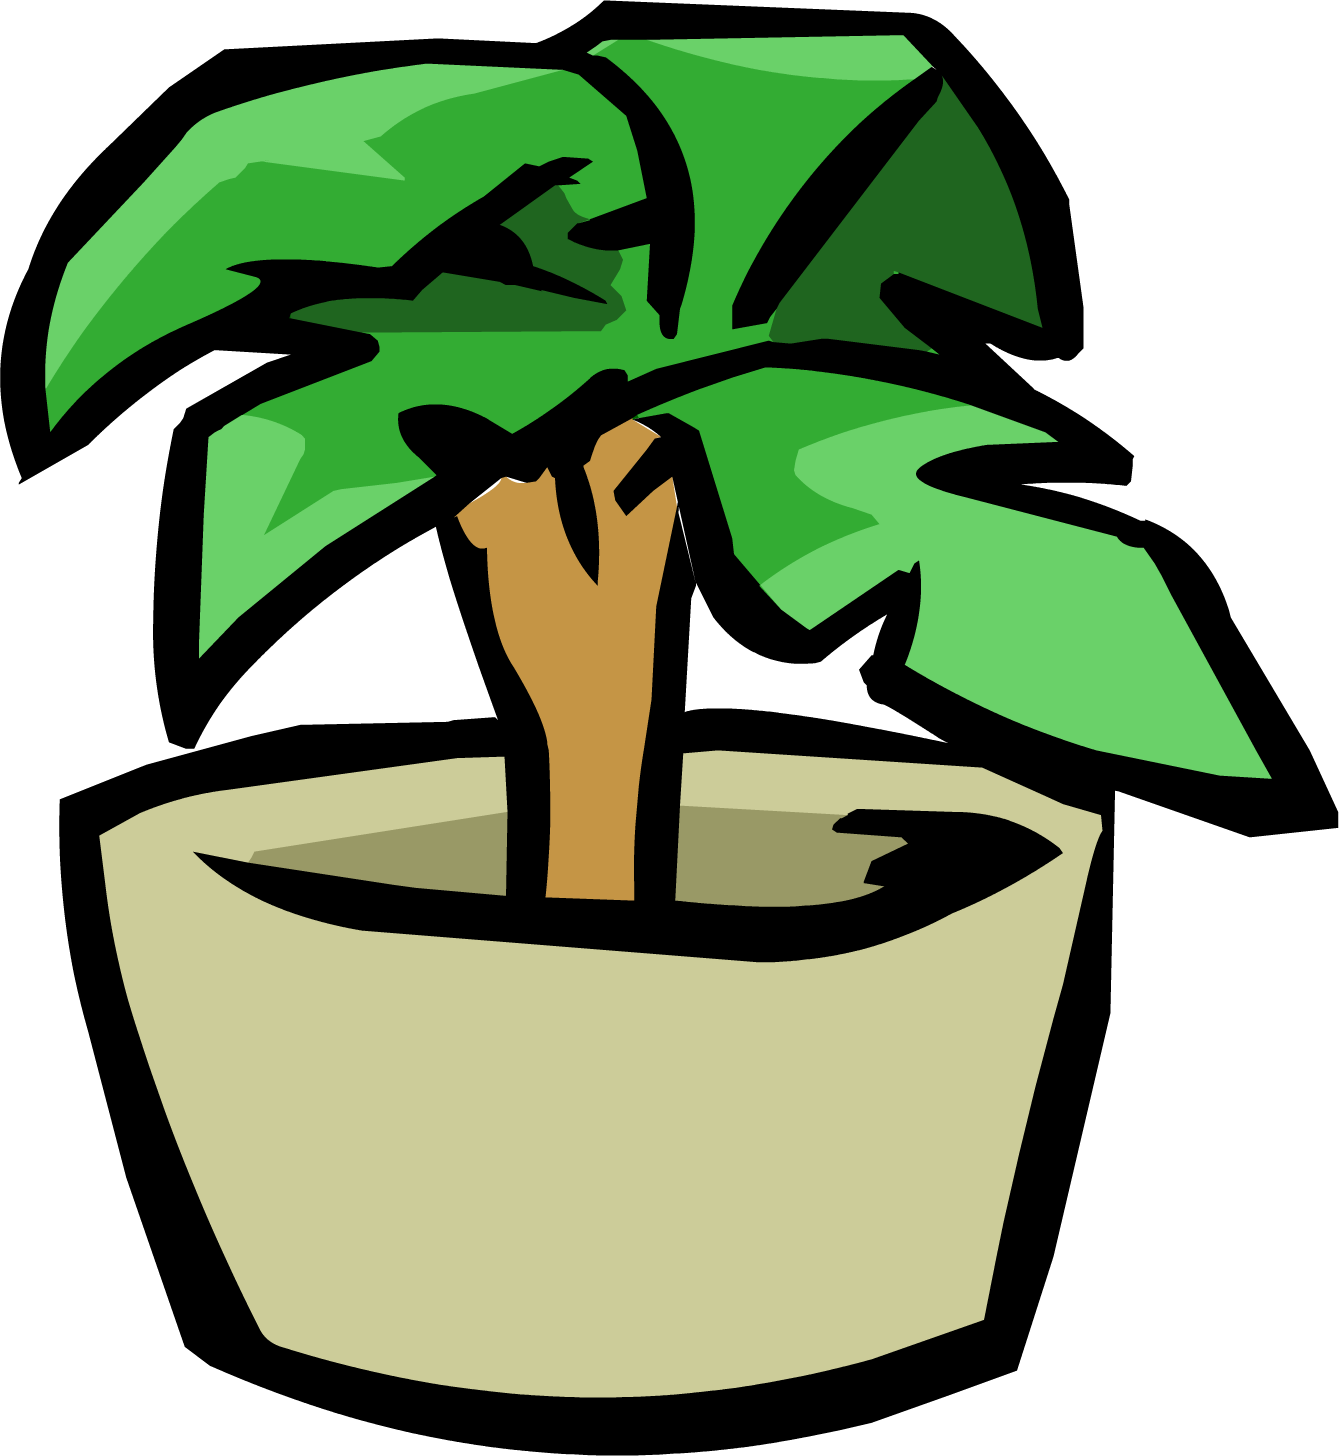 Small house club penguin. Plants clipart indoor plant